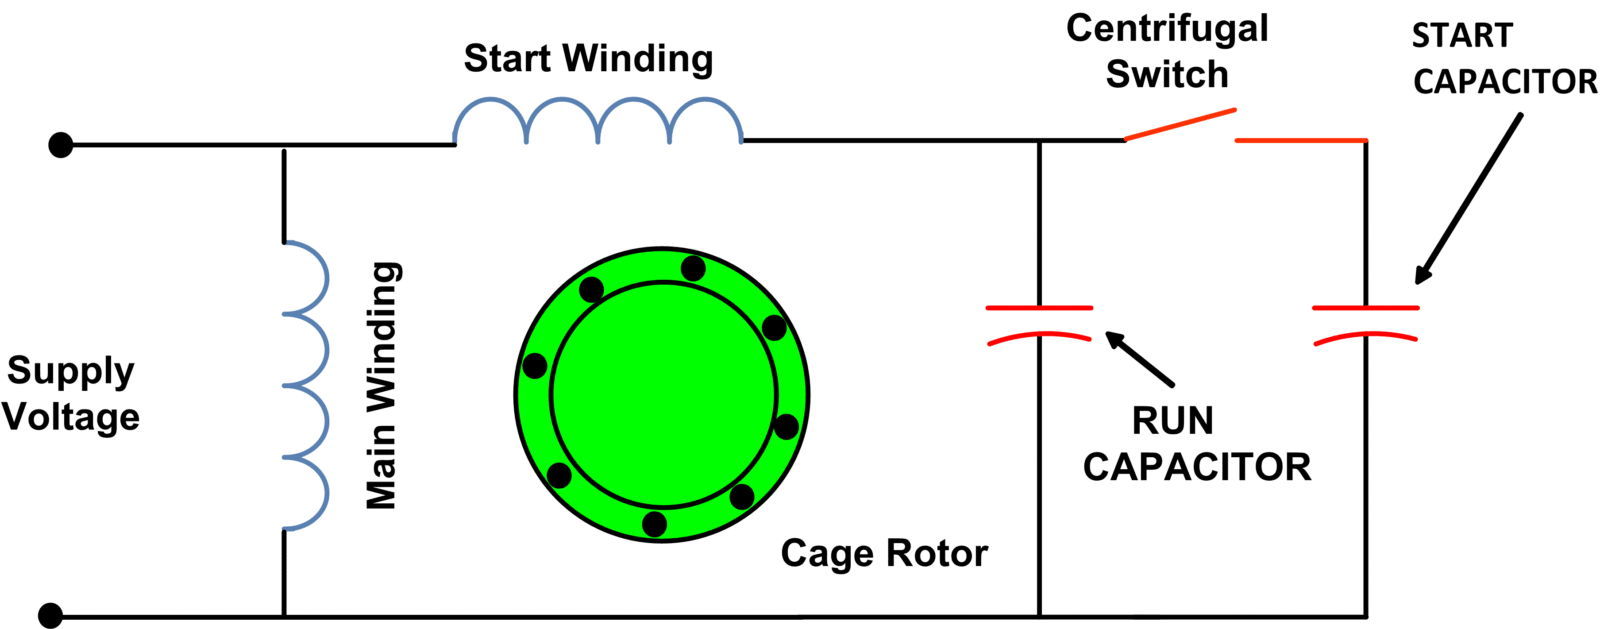 Wiring a start capacitor